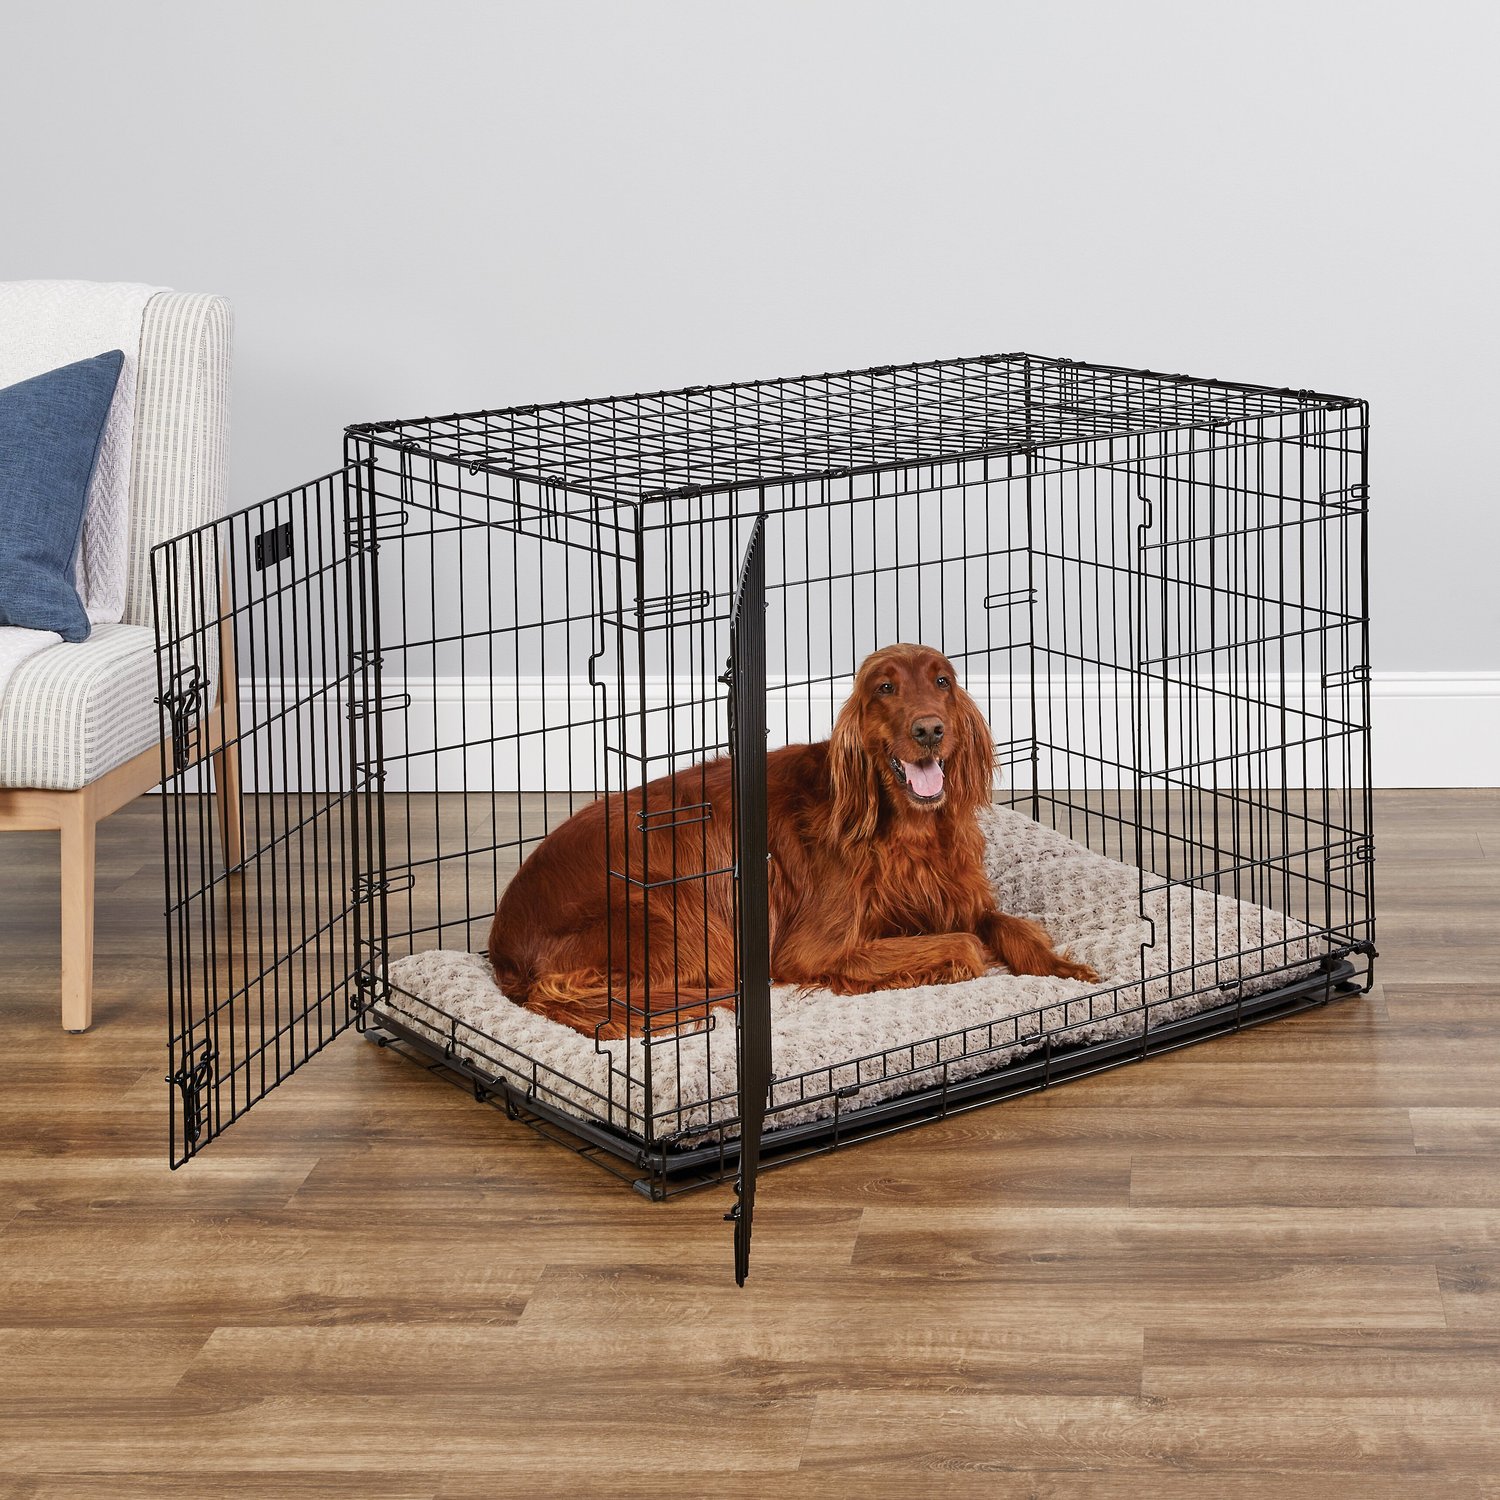 2 Dog Bowls & Pet Bed 1-Year Warranty on ALL Items The Perfect Kit for Your New Dog Includes a Dog Crate MidWest iCrate Starter Kit Dog Crate Cover 